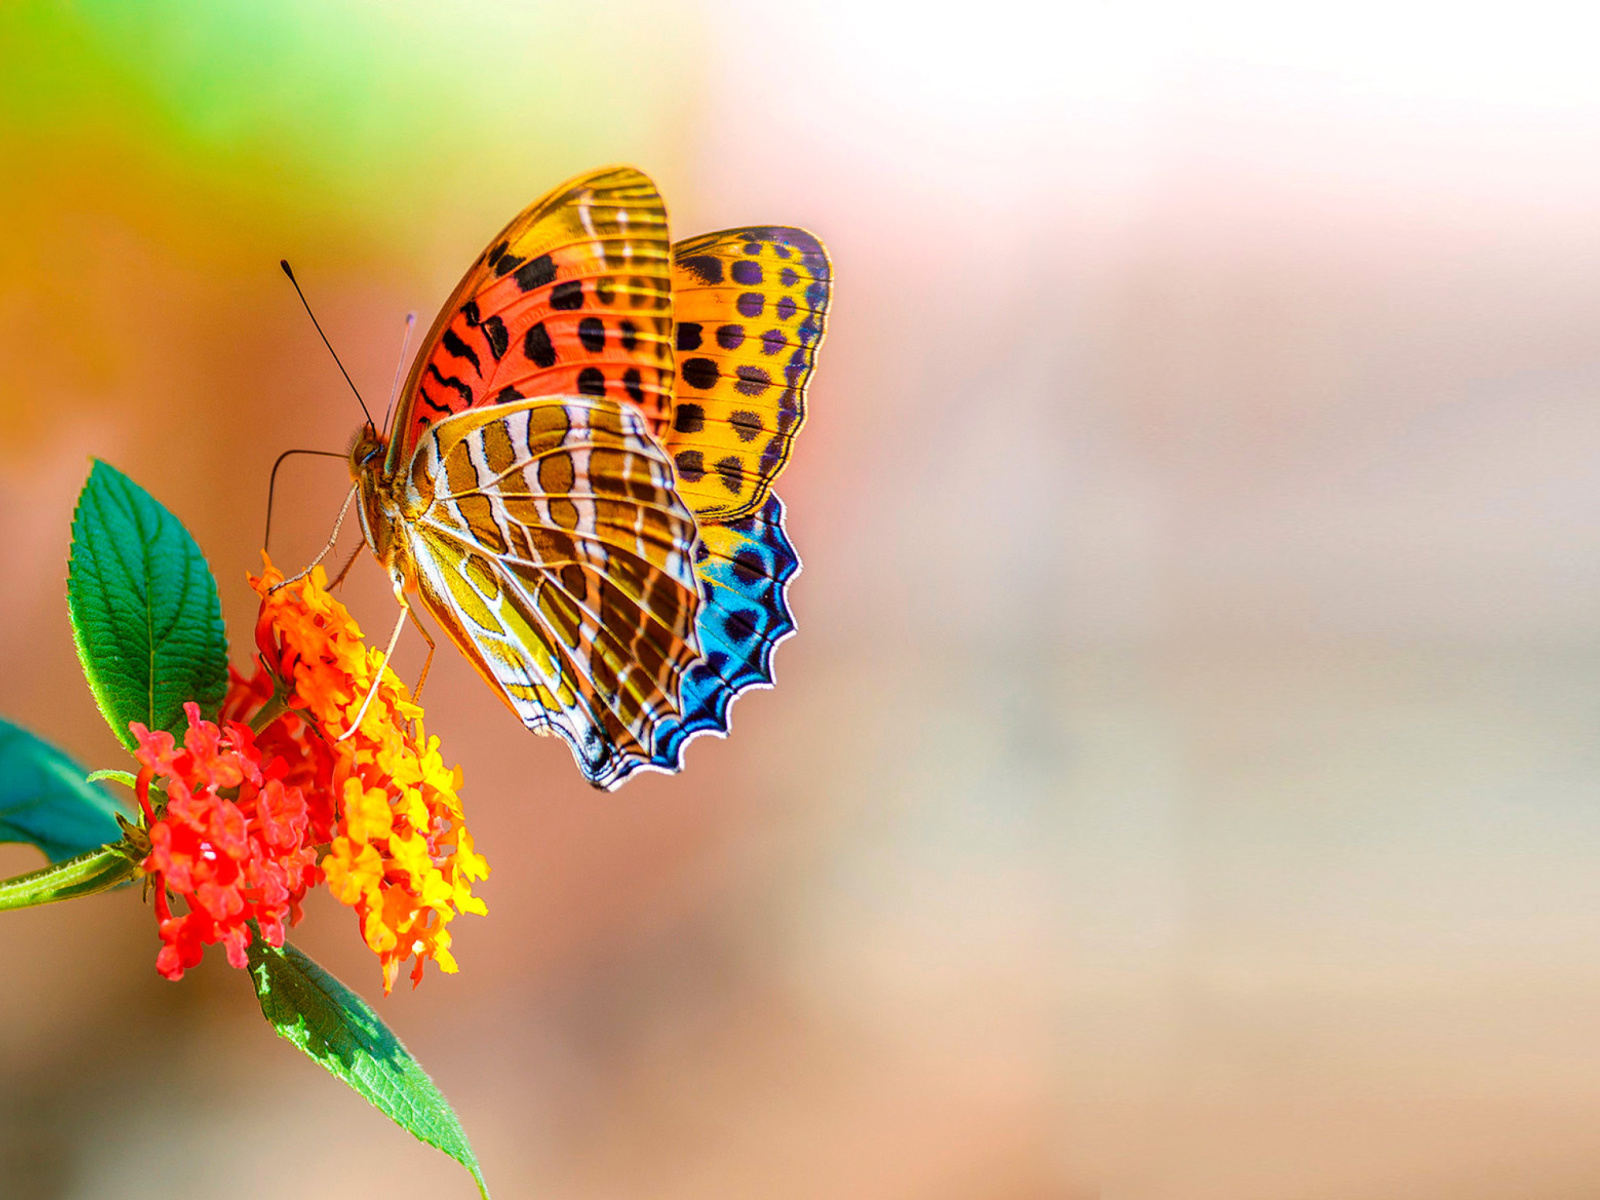 Colorful Animated Butterfly wallpaper 1600x1200